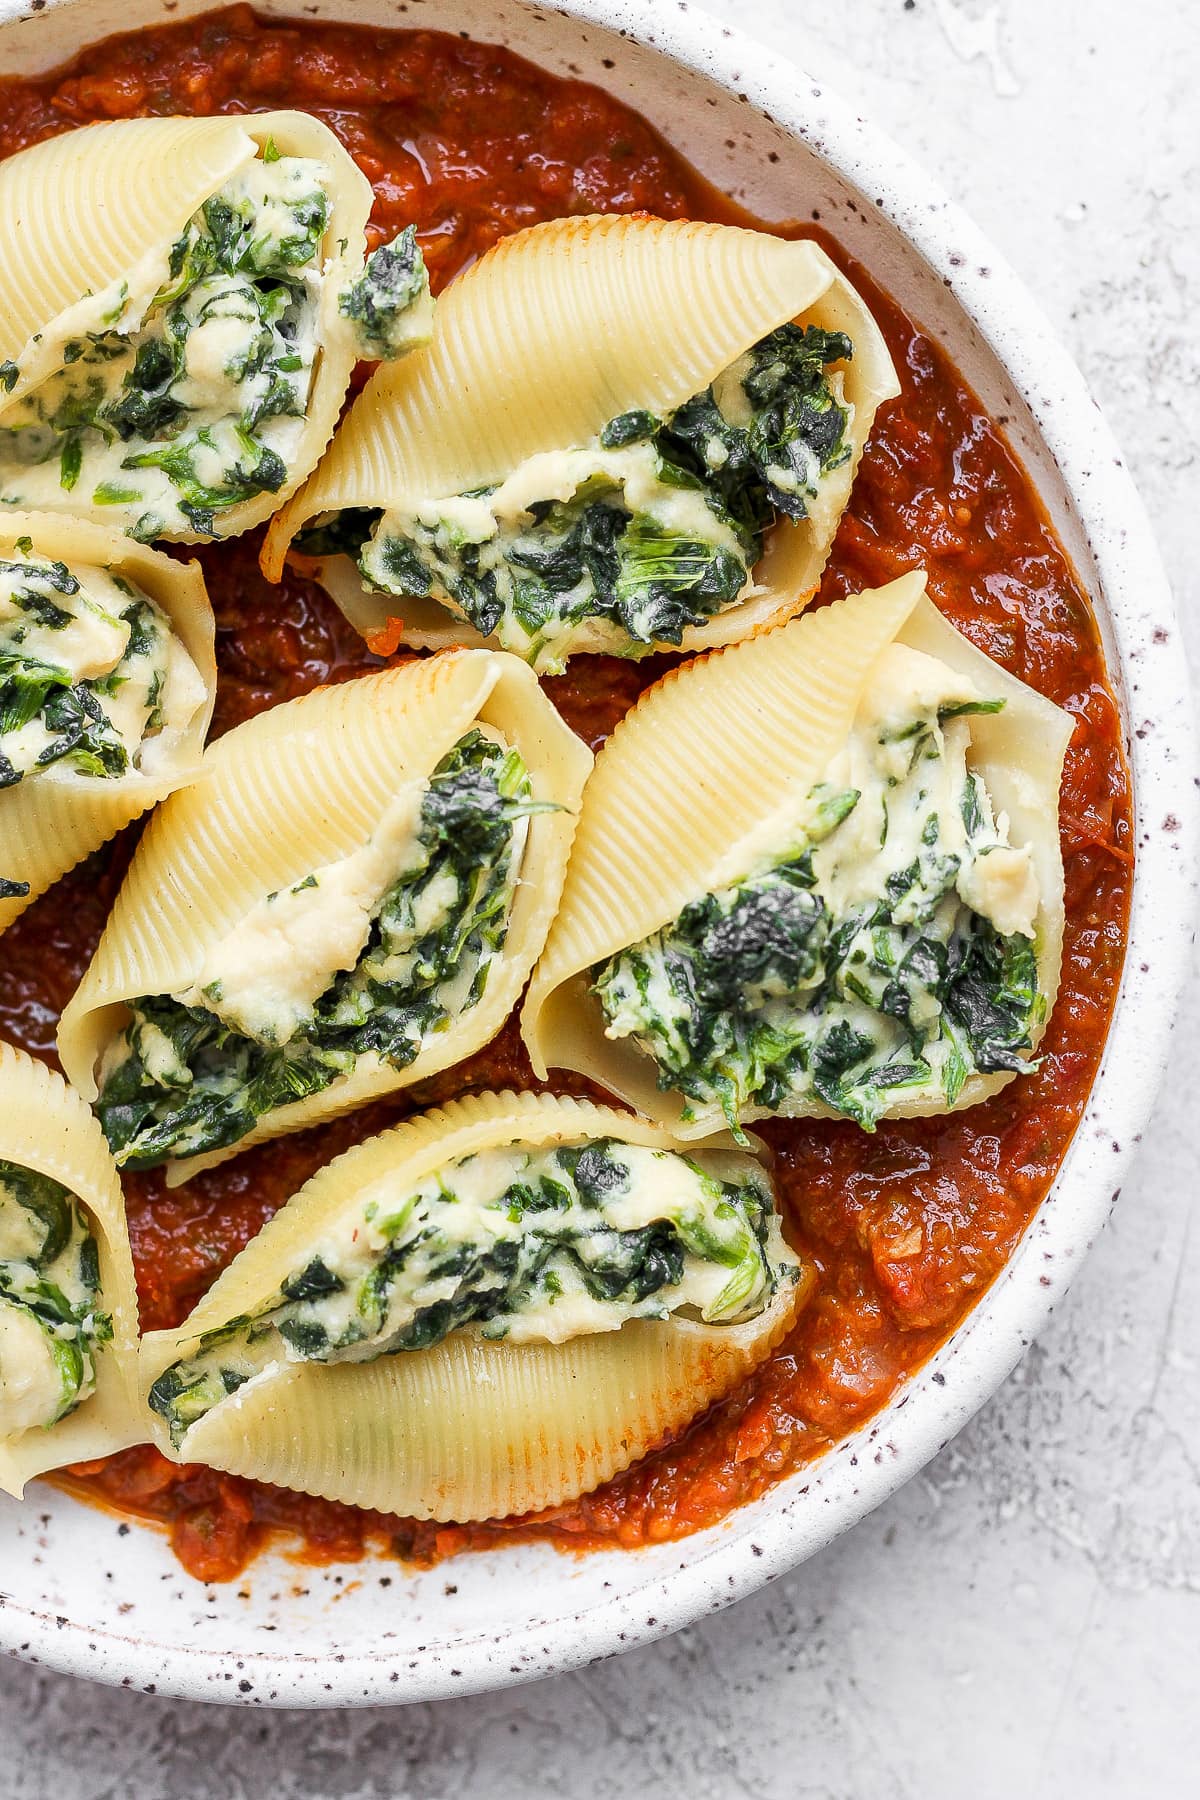 Baked stuffed shells on a plate with the sauce.